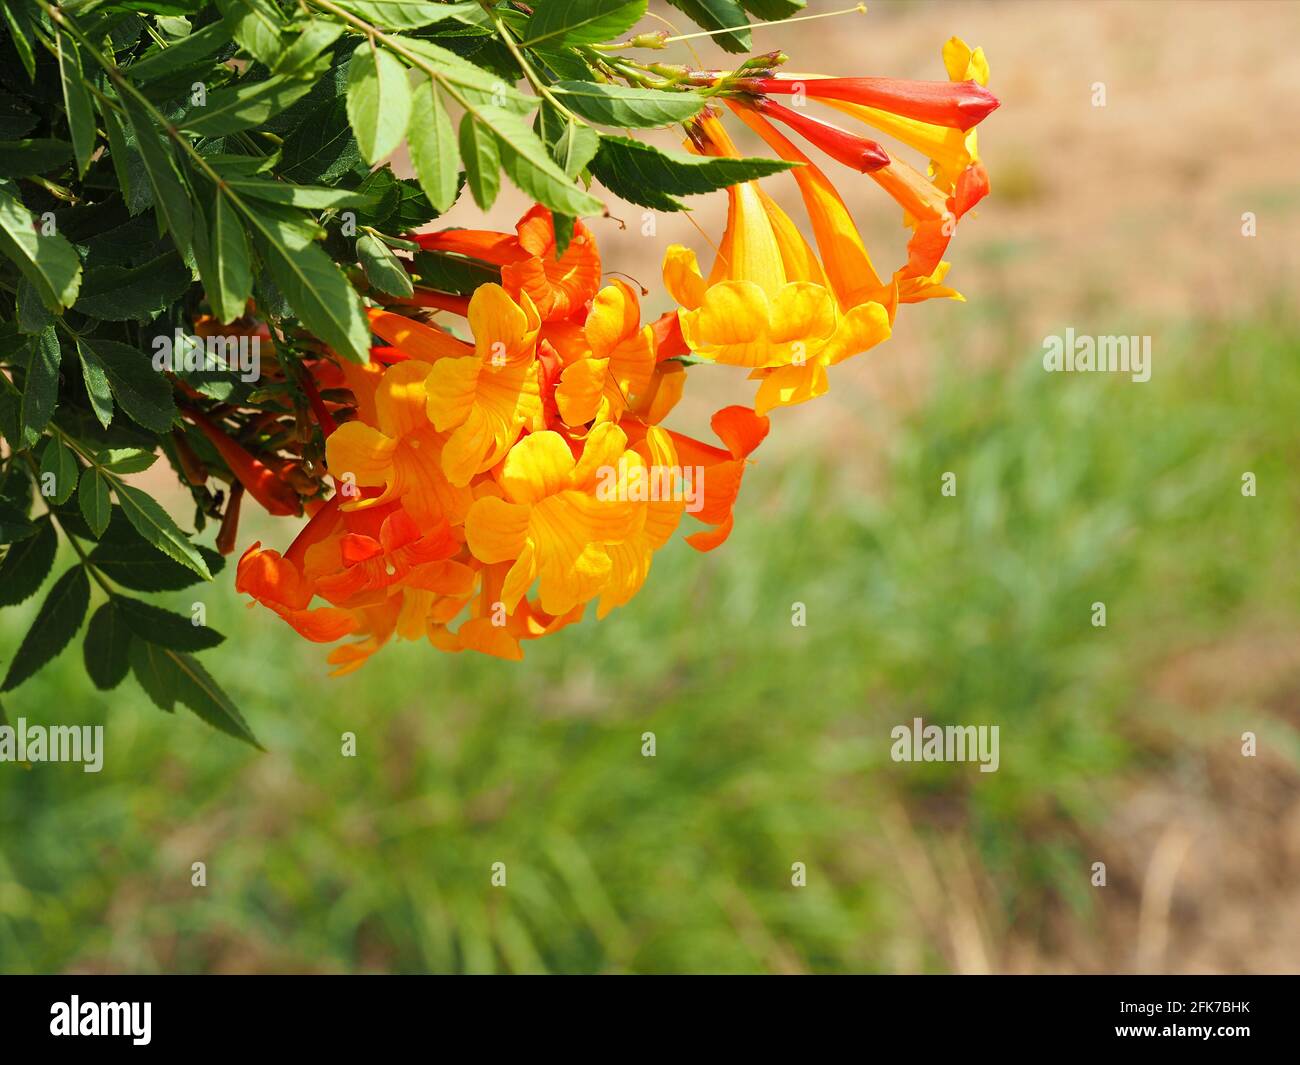 Bright orange flower of Tecoma stans on a blurred background. Stock Photo